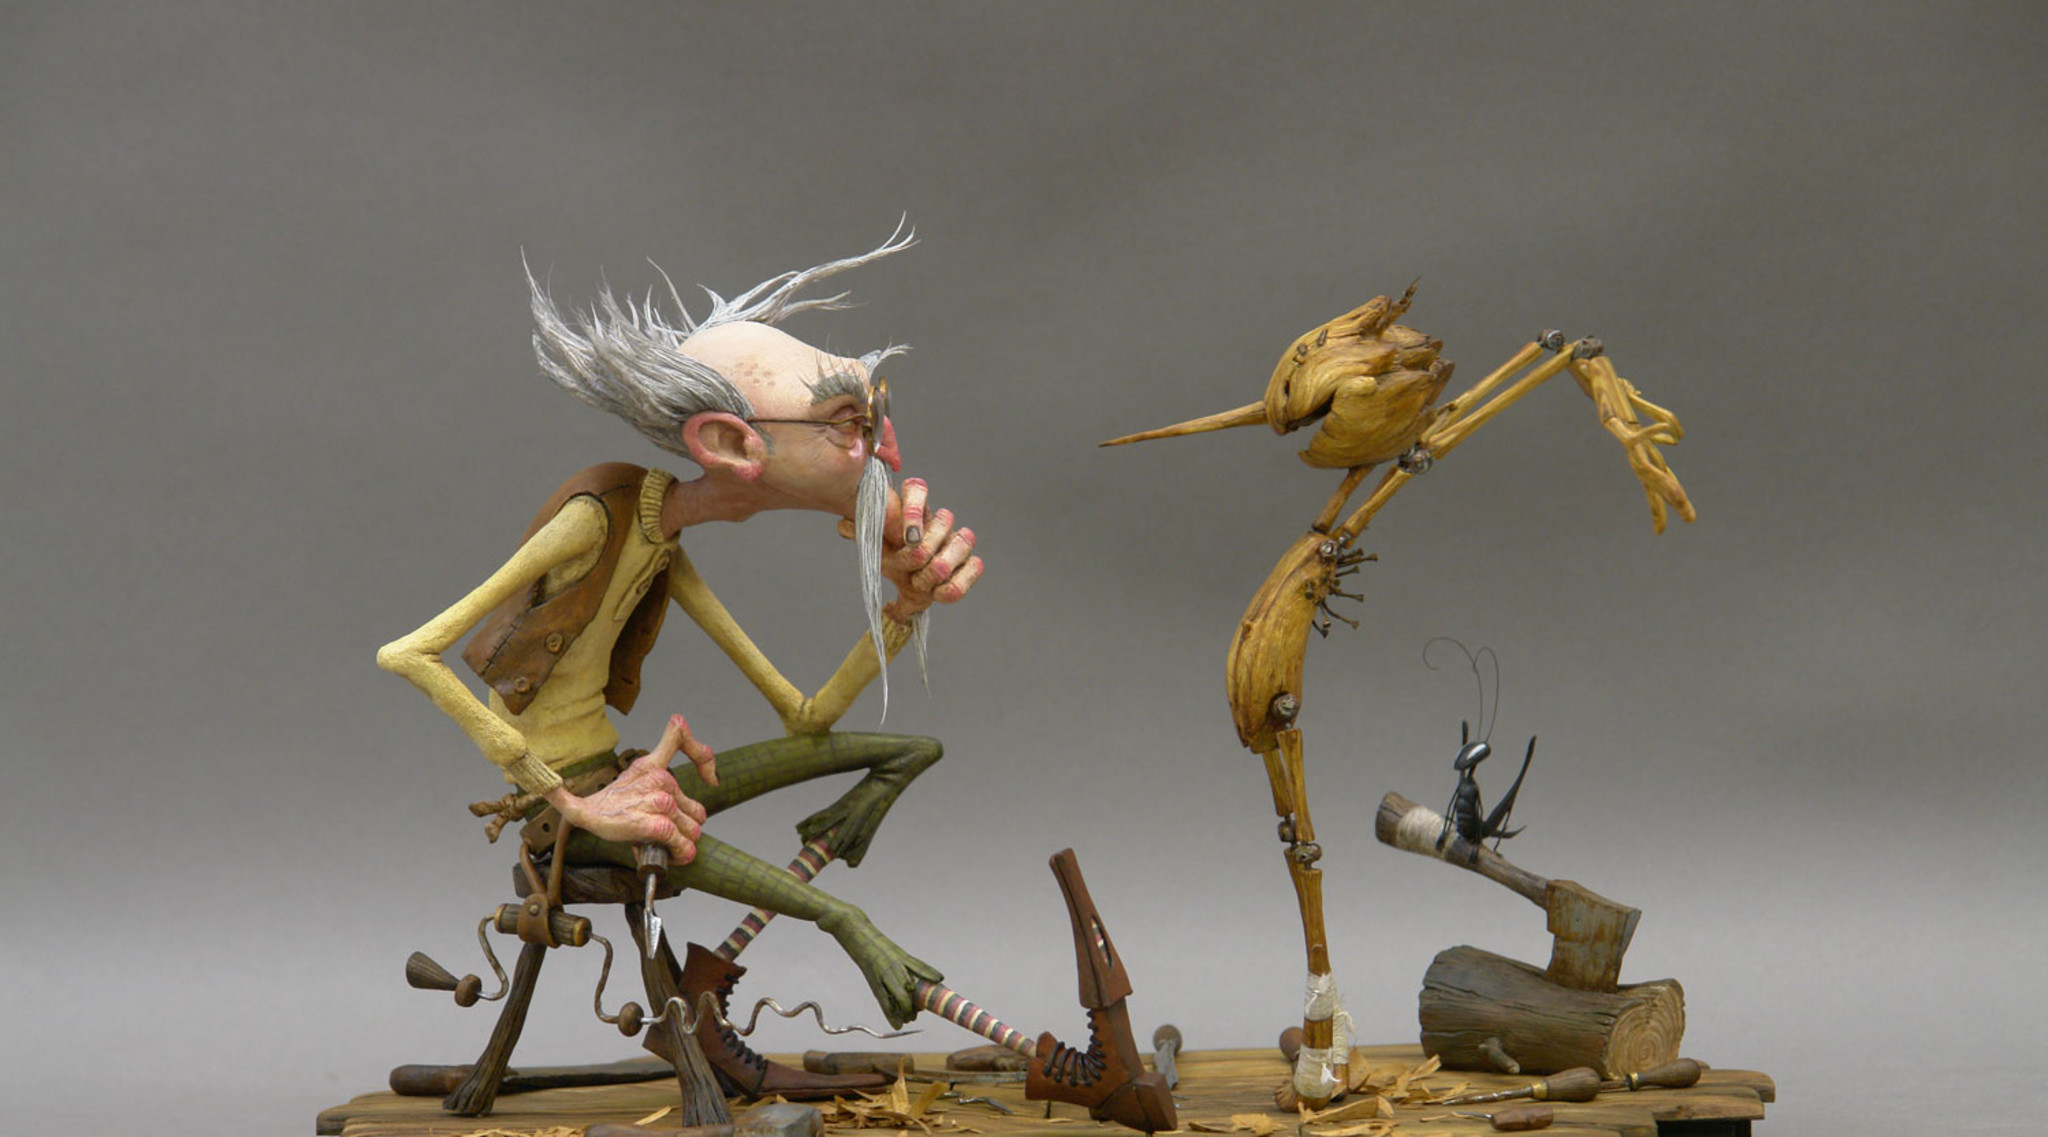 Check Out the First Look Trailer for Guillermo del Toro's 'Pinocchio'